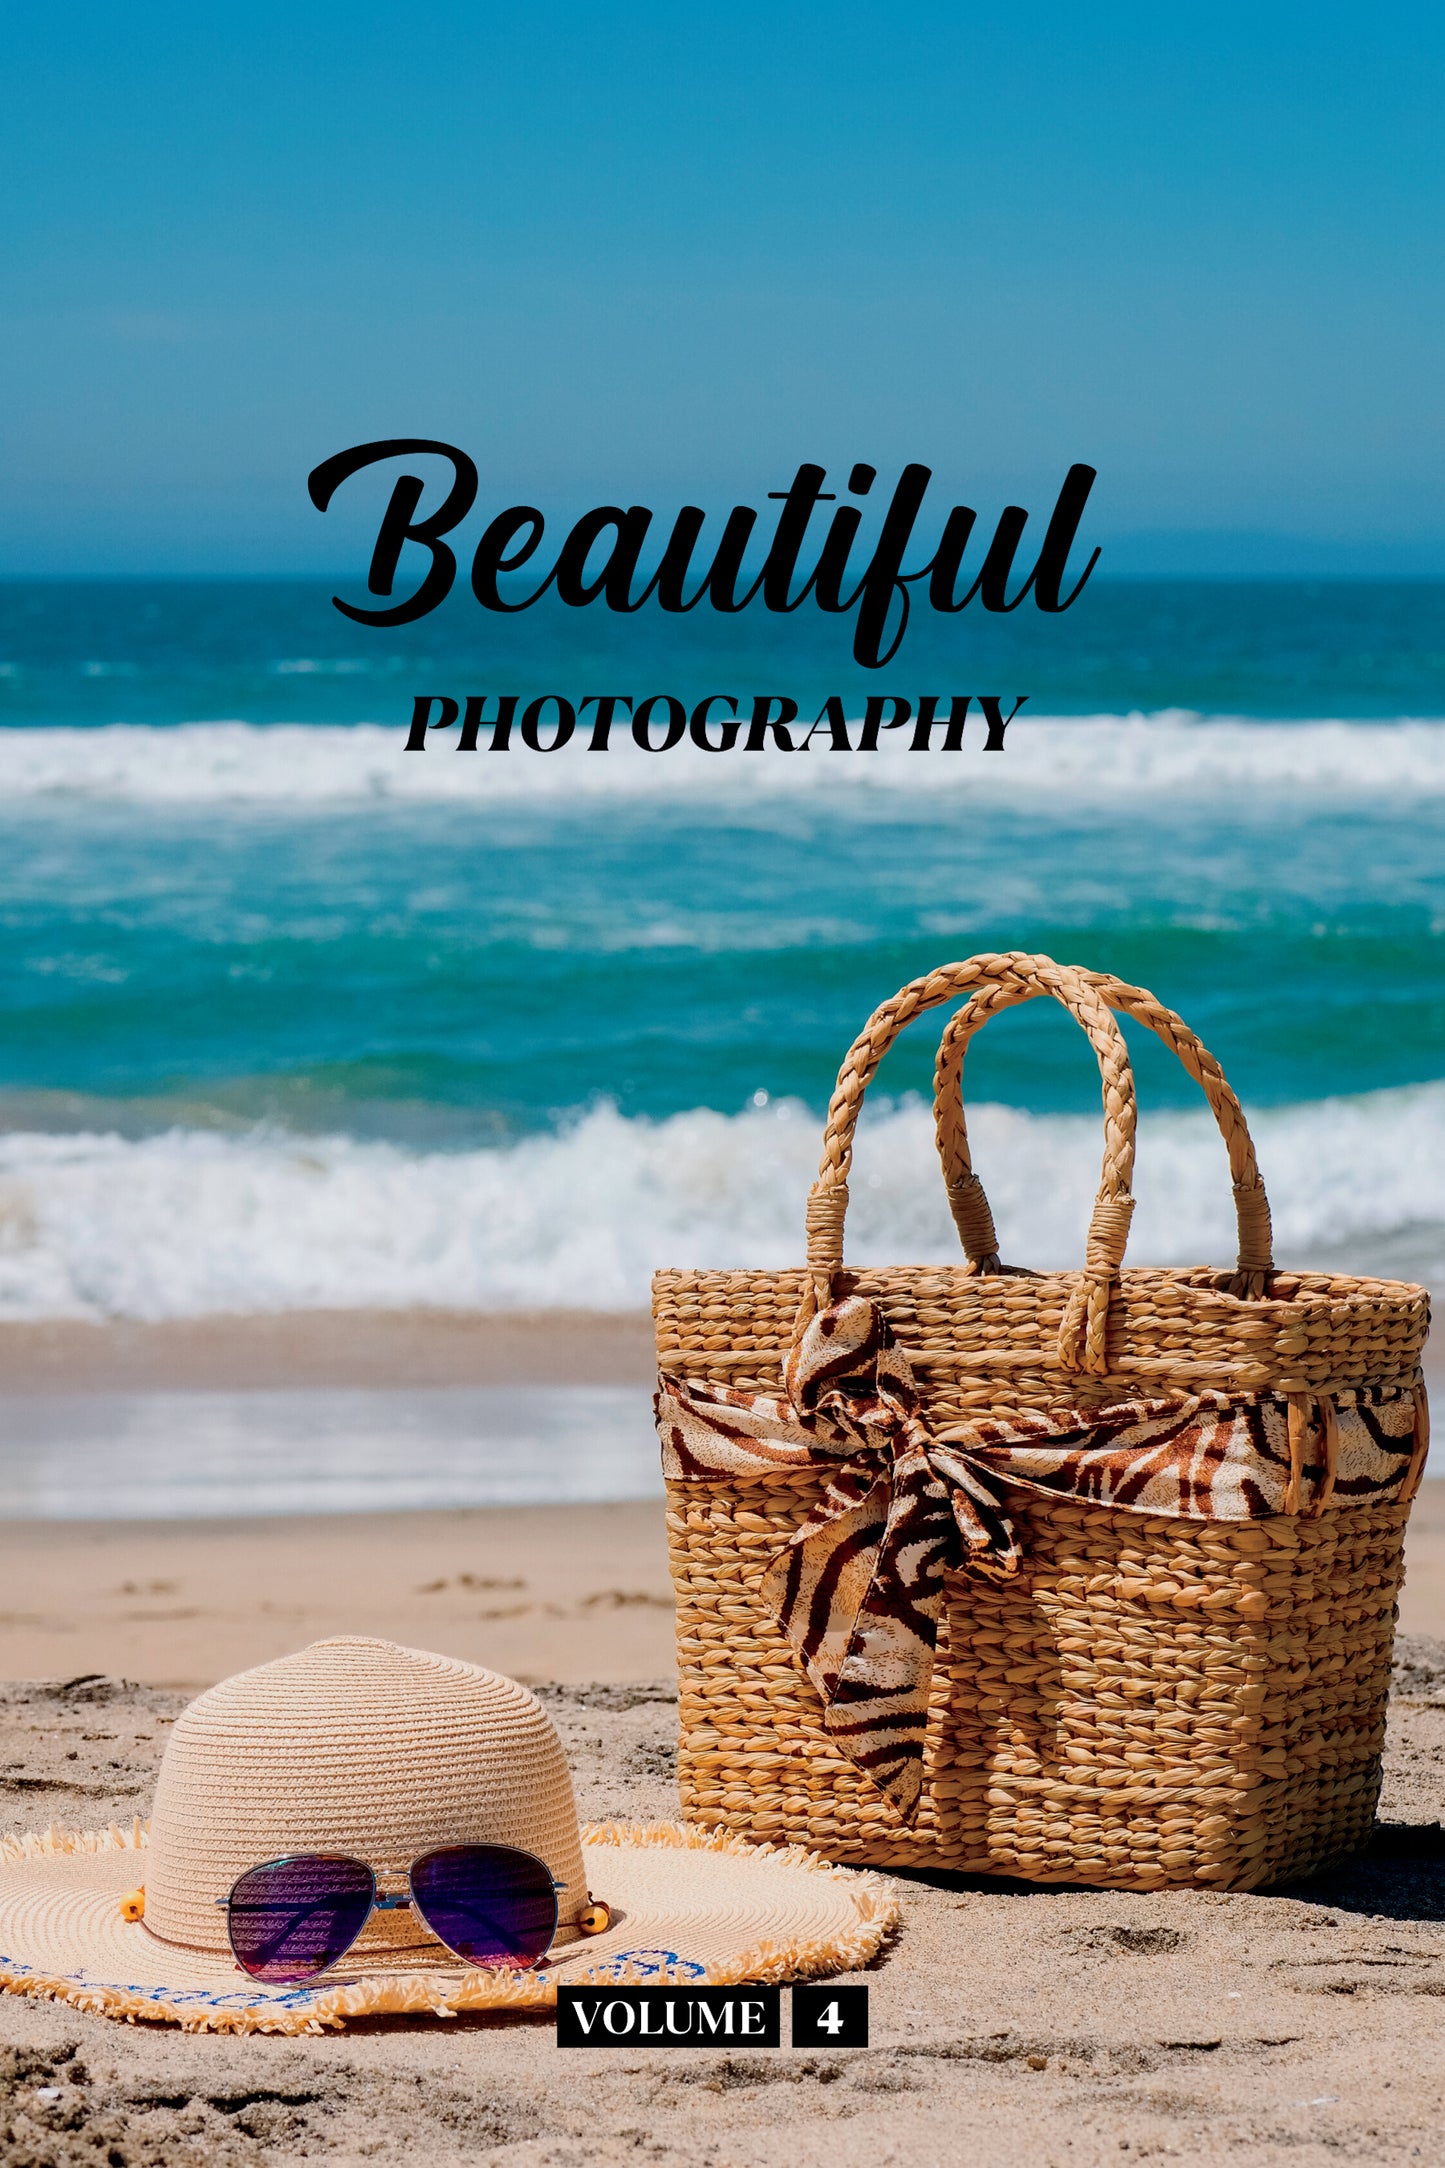 Beautiful Photography Volume 4 (Physical Book)